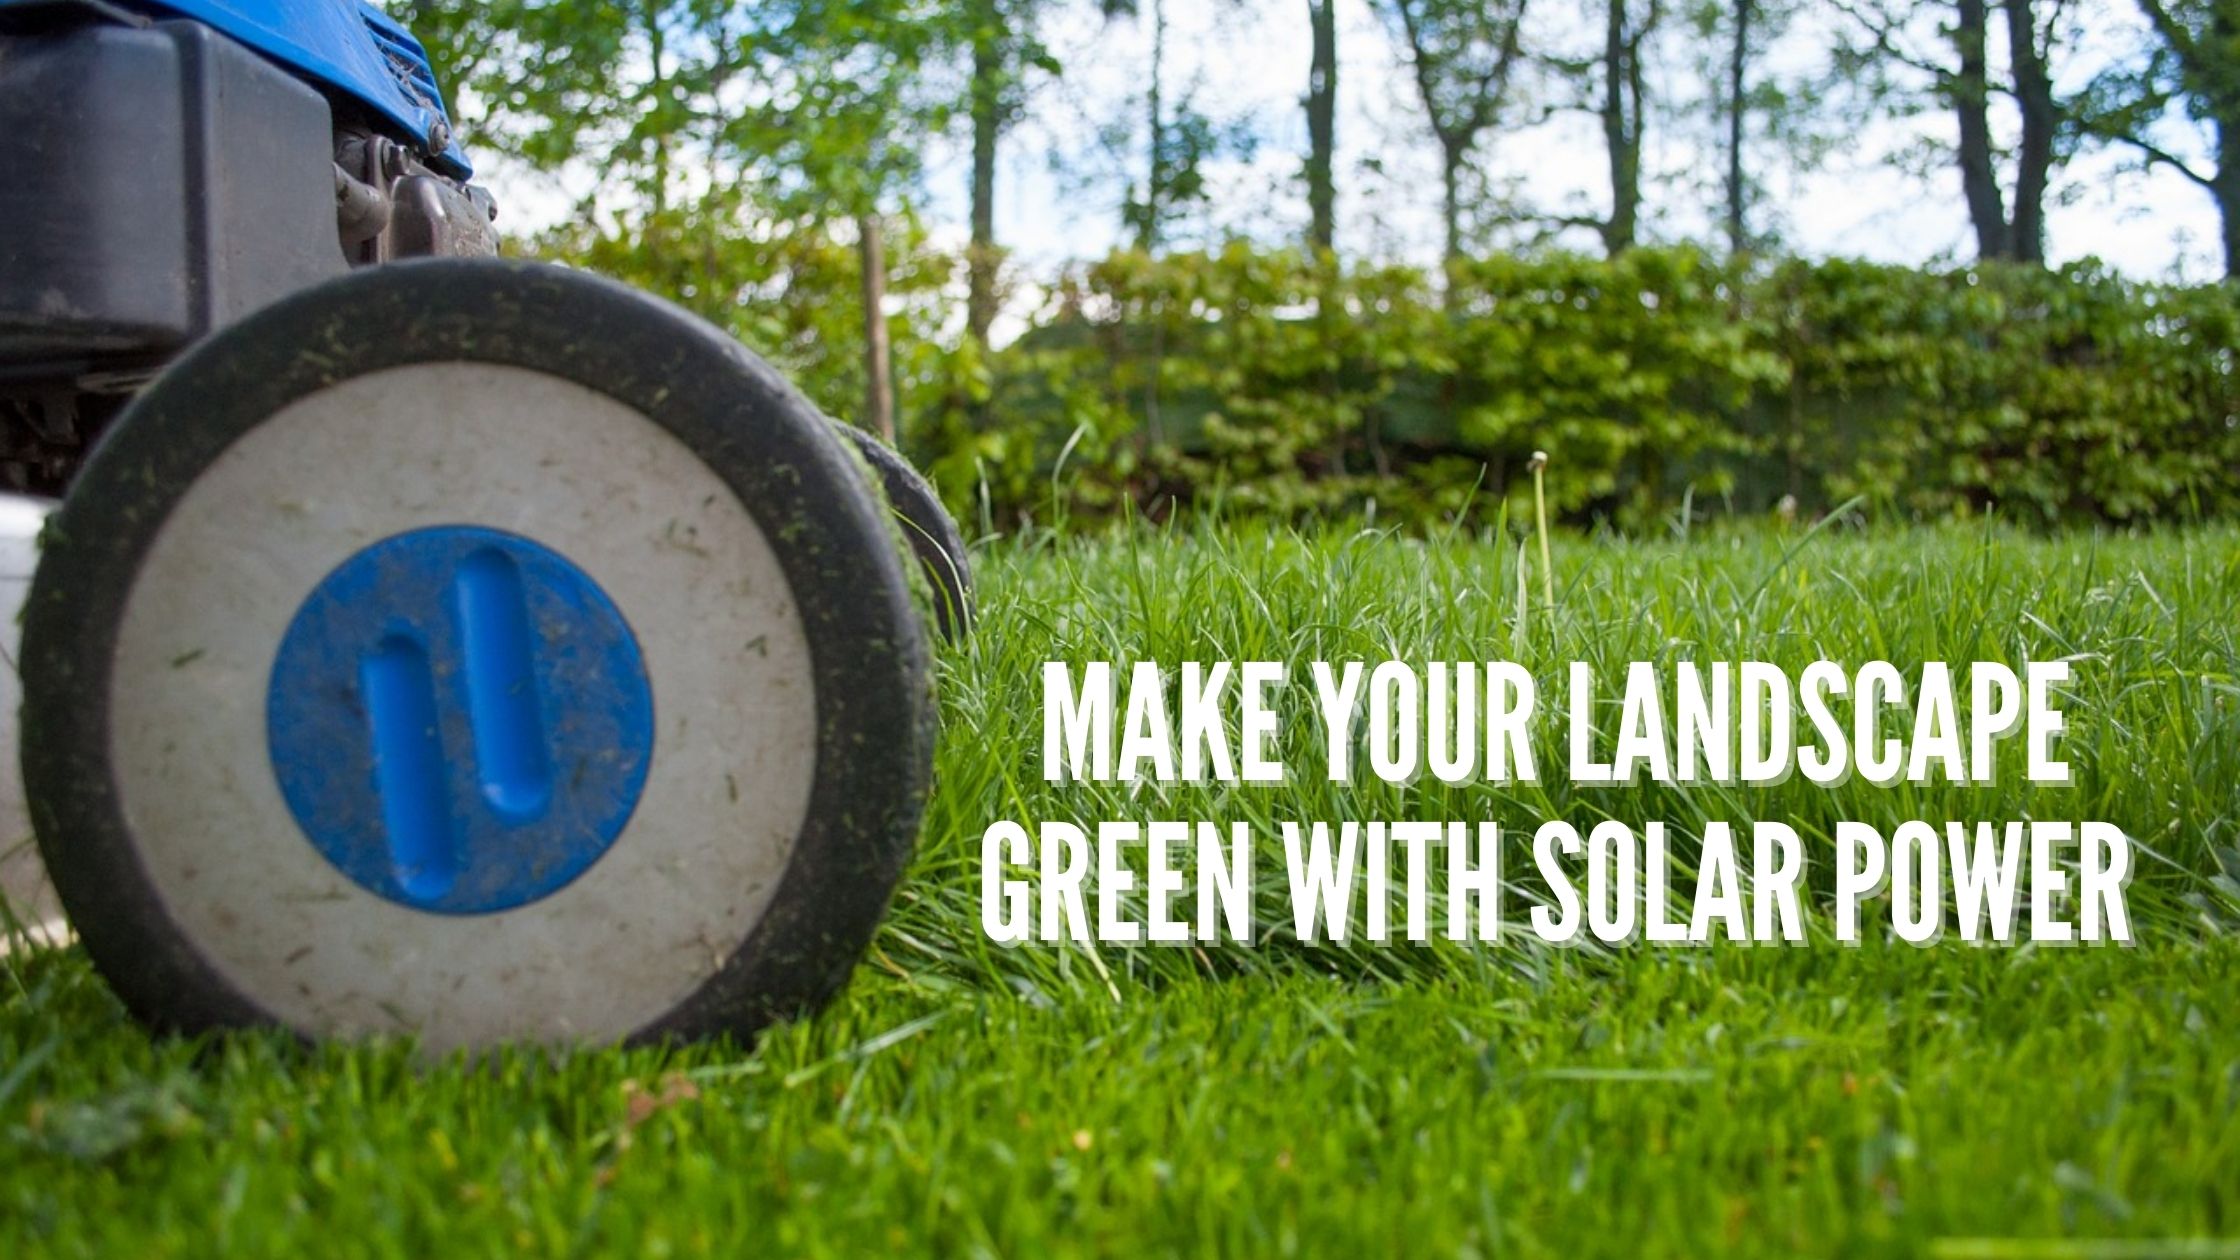 Make your Landscape Green with Solar Power